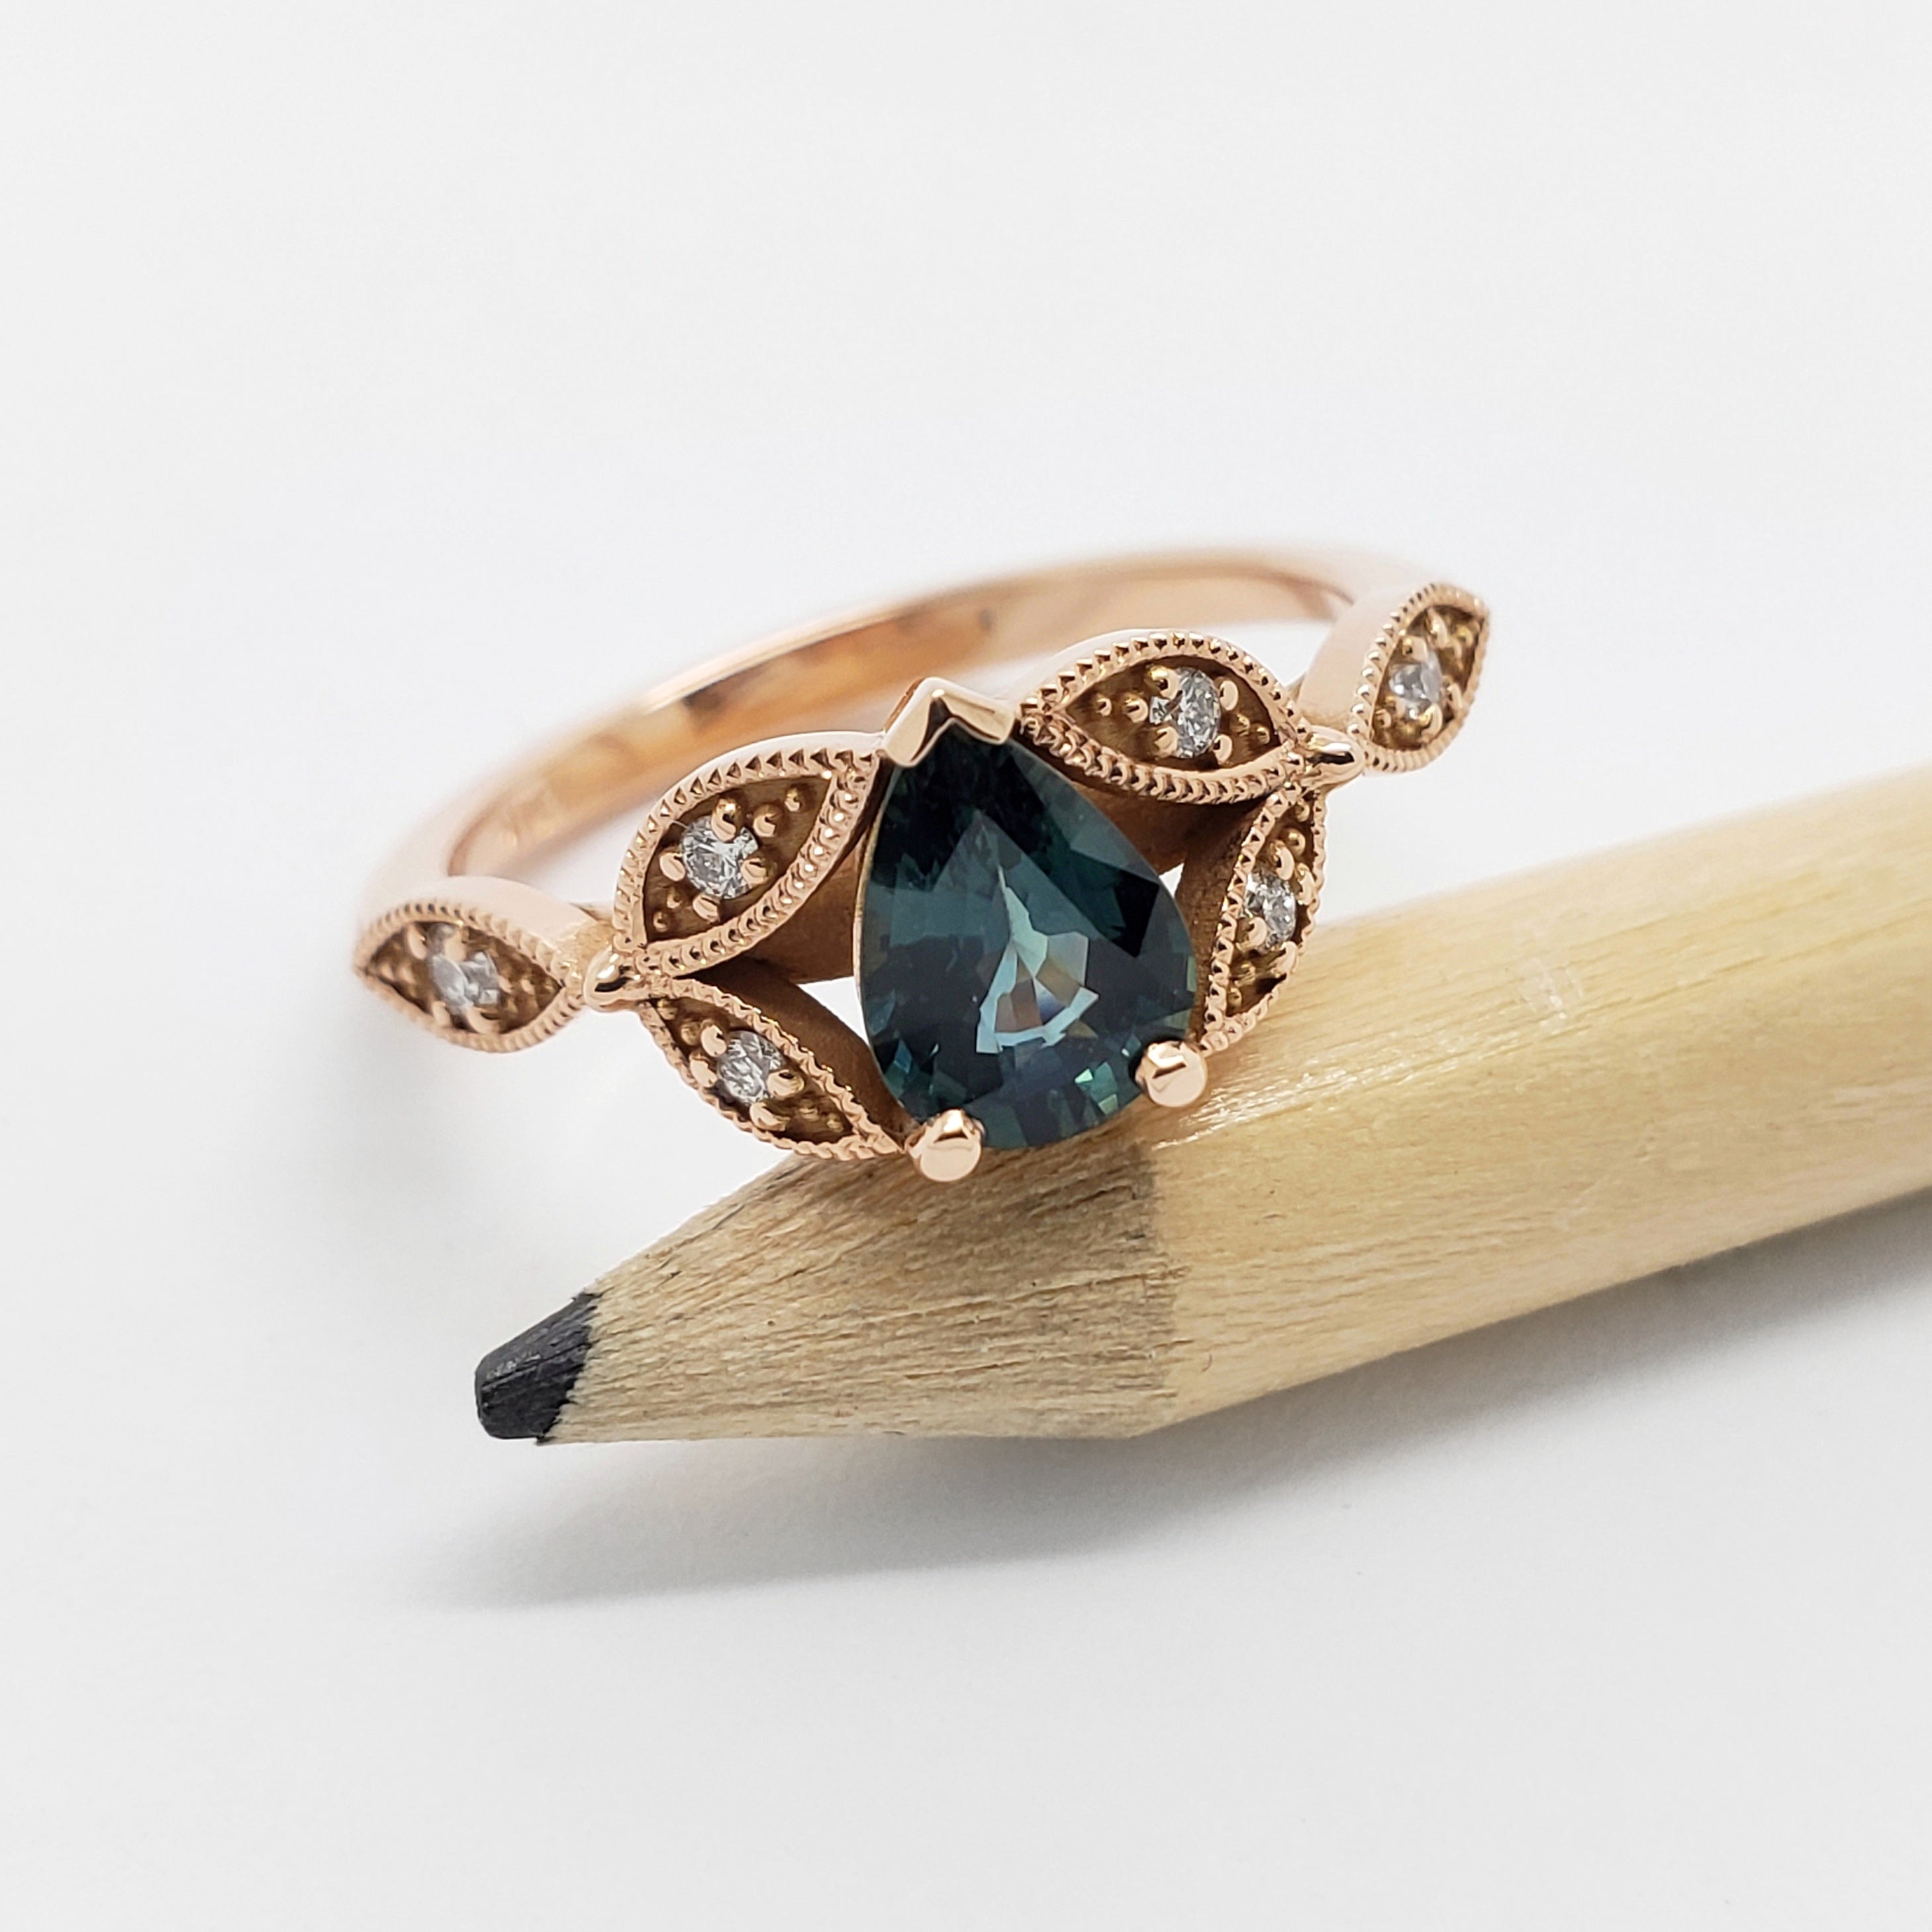 Teal Sapphire Engagement Ring | Era Design Vancouver Canada